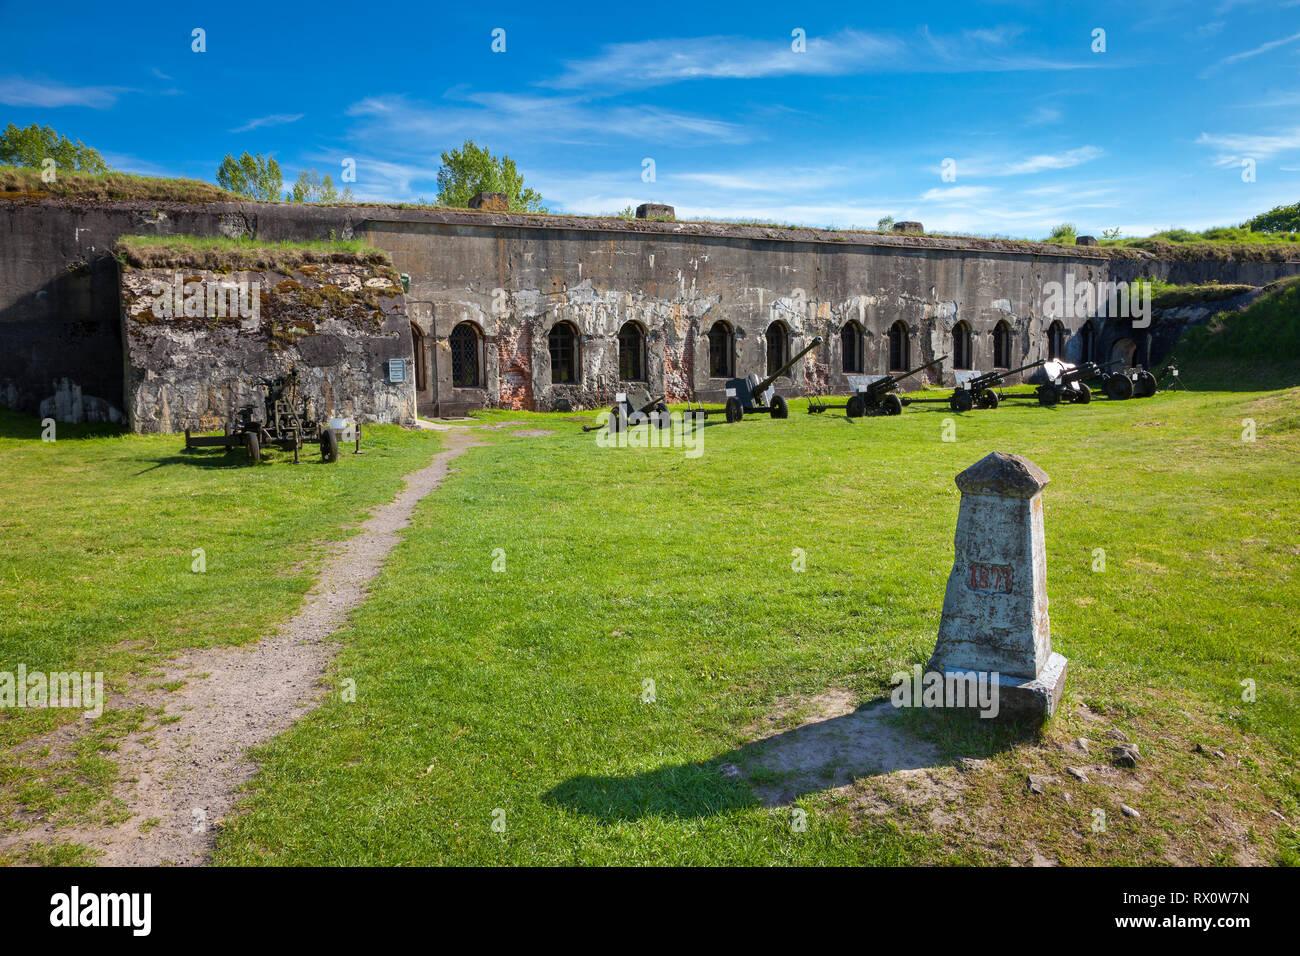 Brest, Belarus - May 12, 2015: The Fifth Fort of Brest Fortress in Belarus. Was built in 1878. Old canons near building. Brest, Belarus. Stock Photo